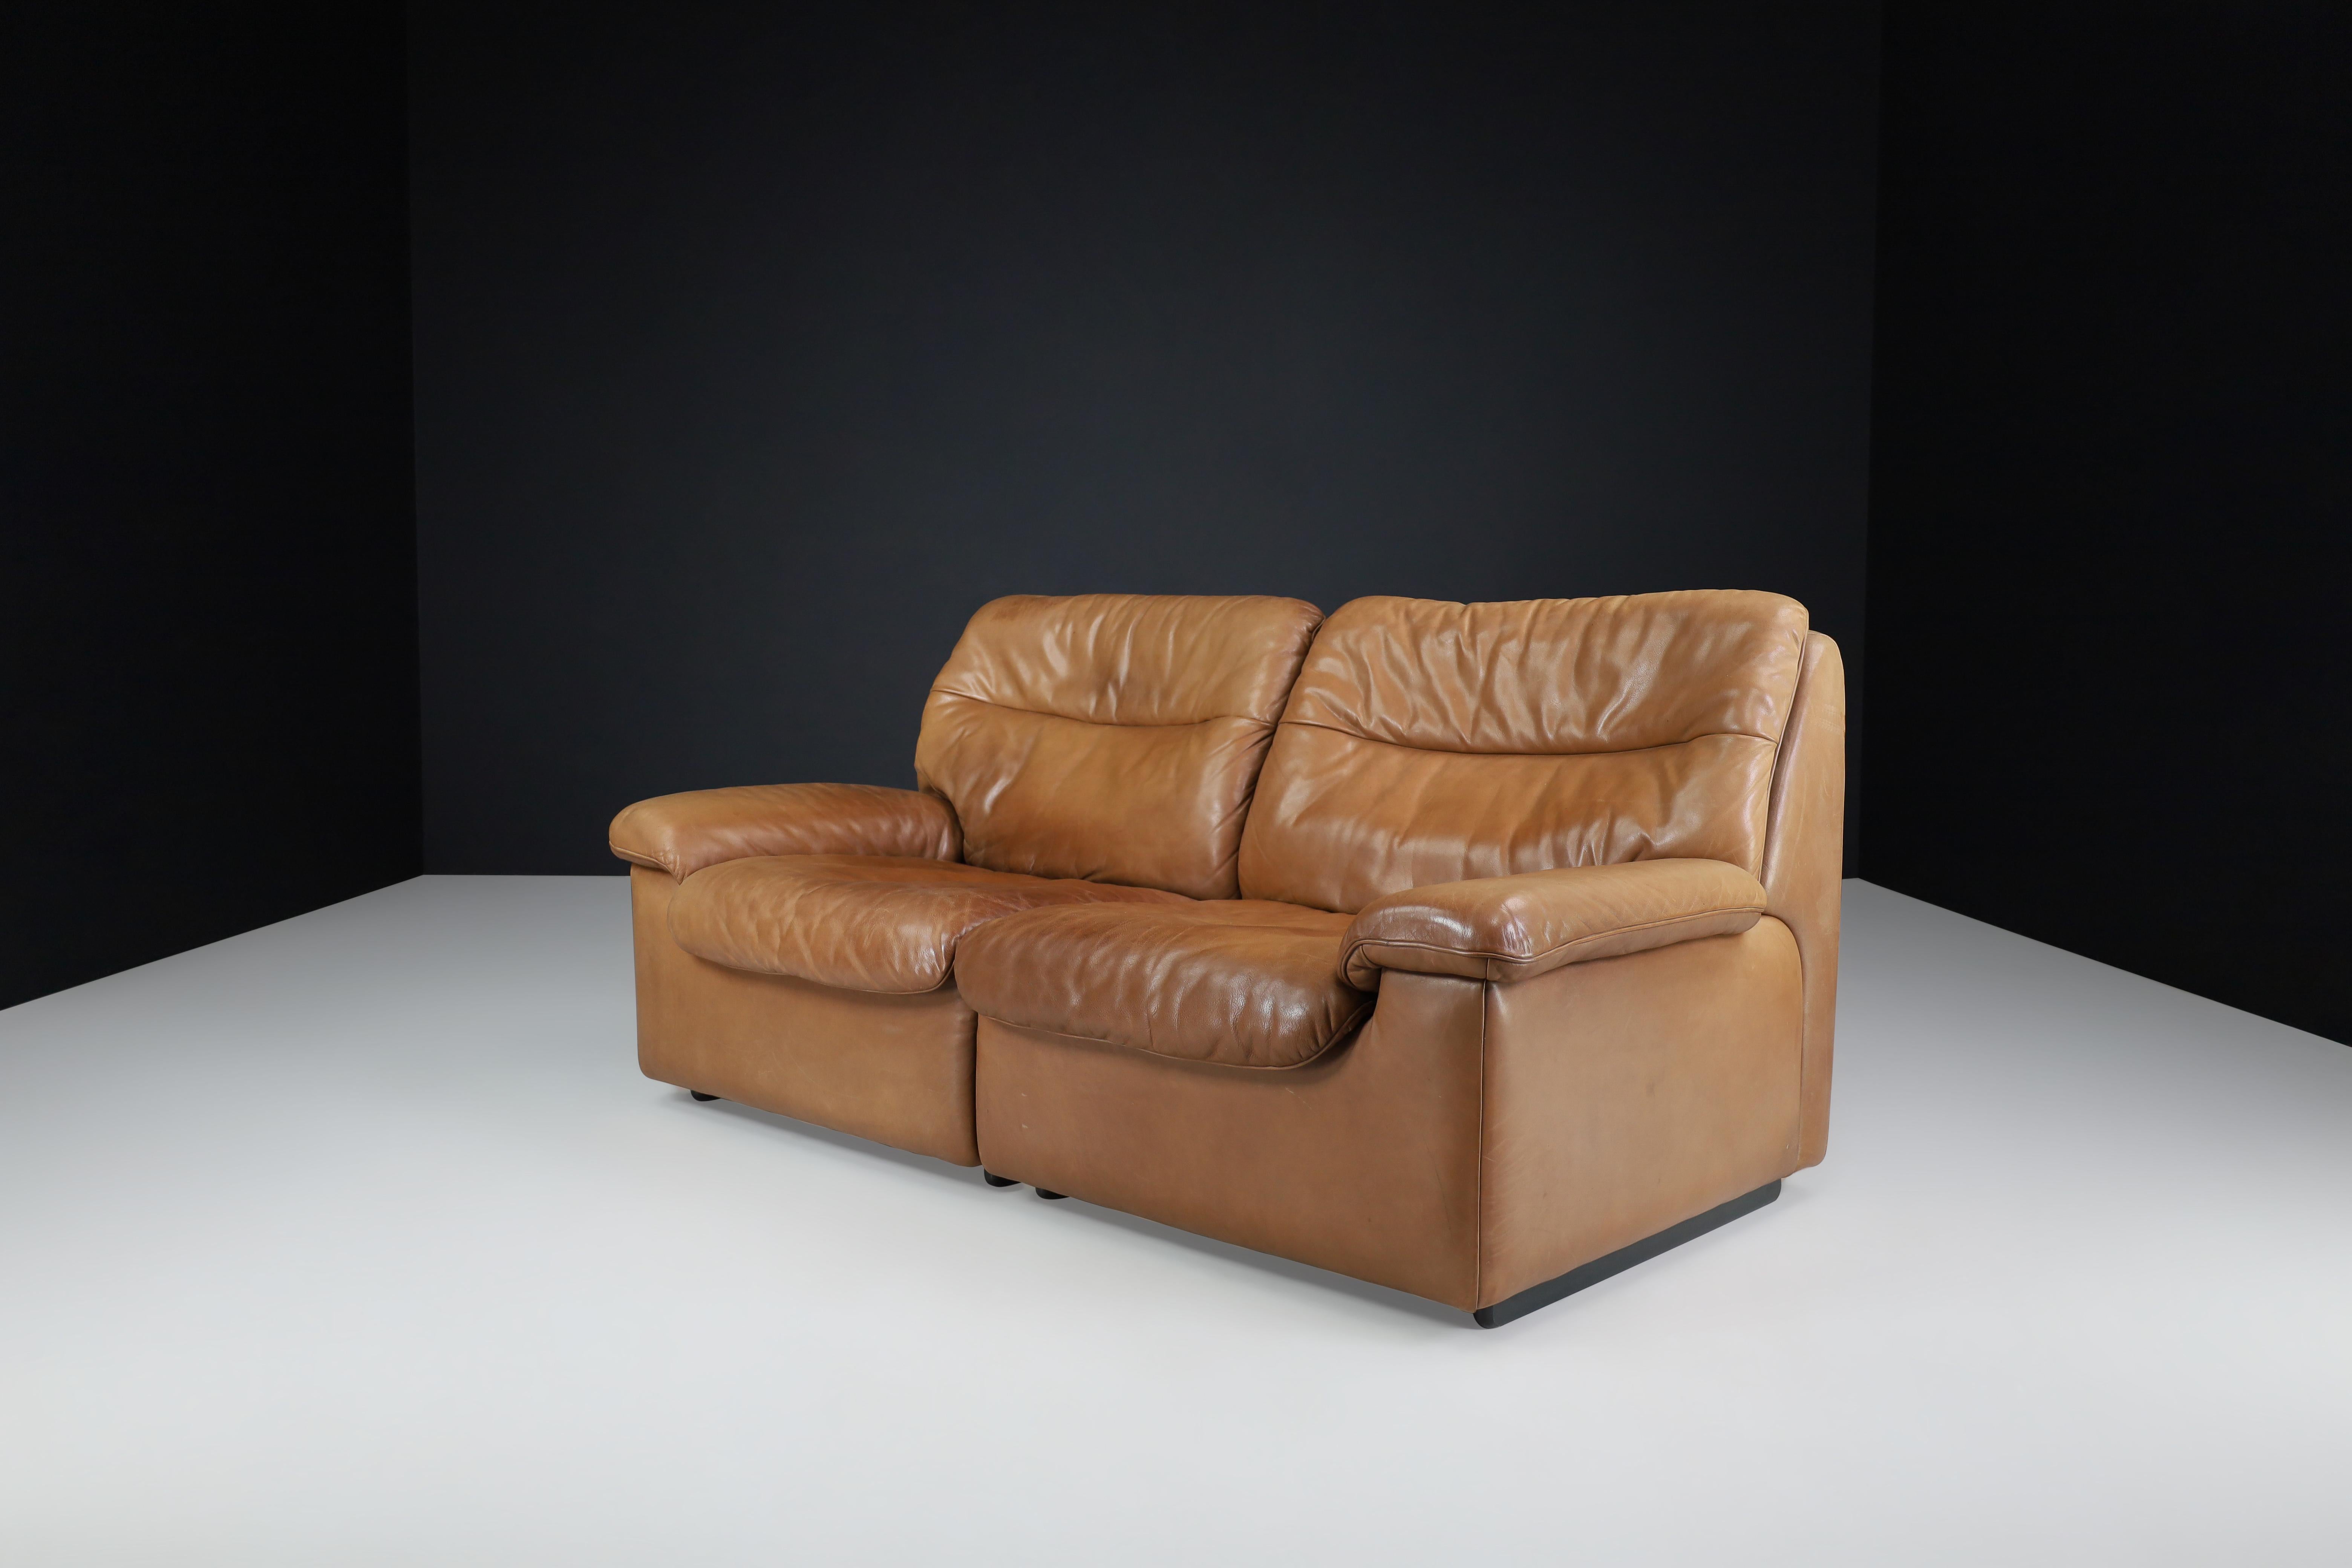 Swiss De Sede DS 63 Two-Seater Sofa in Patinated Leather, Switzerland, 1970s For Sale